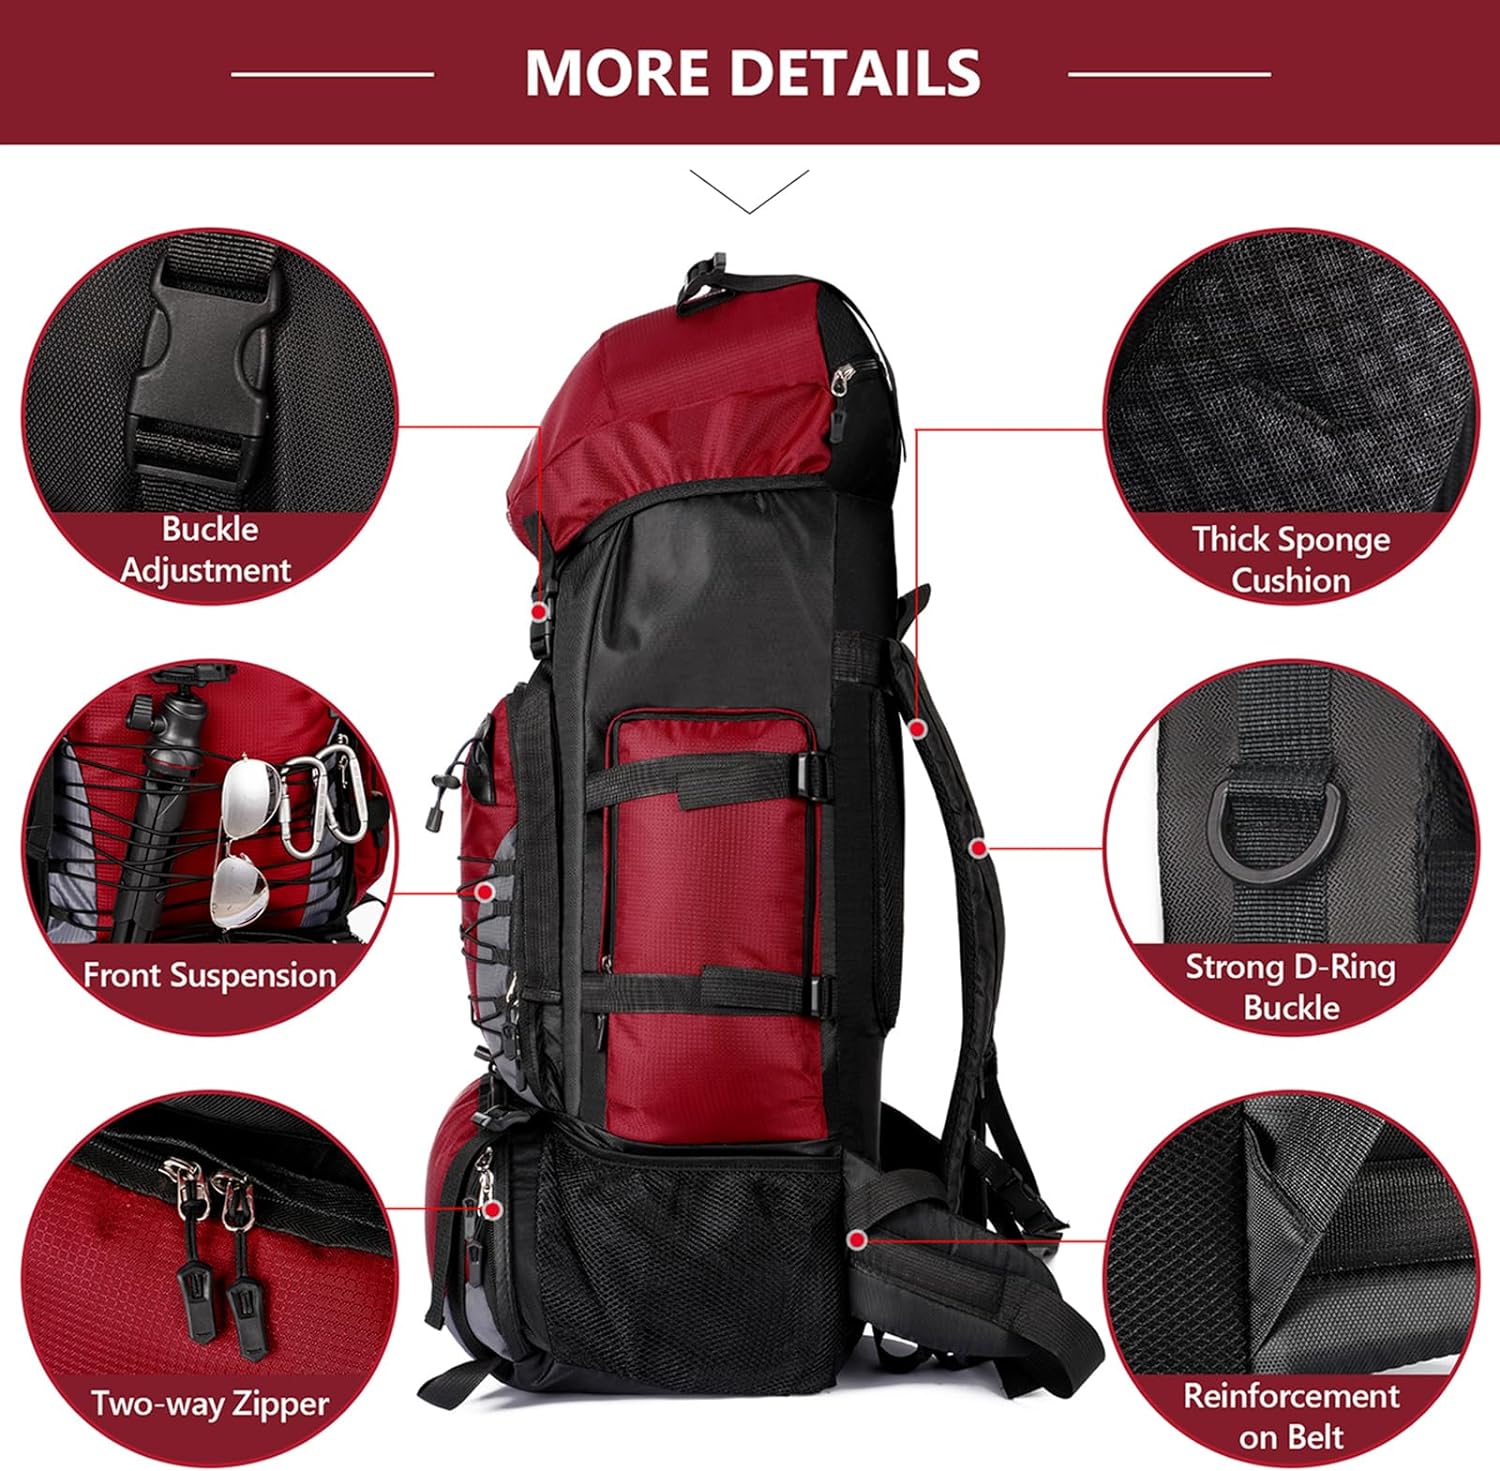 Unineovo 90L Hiking Backpack for Women Men, Waterproof Camping Essentials Bag with Rain Cover, 90 Liter Lightweight Backpacking Back Pack -No Frame (Red)